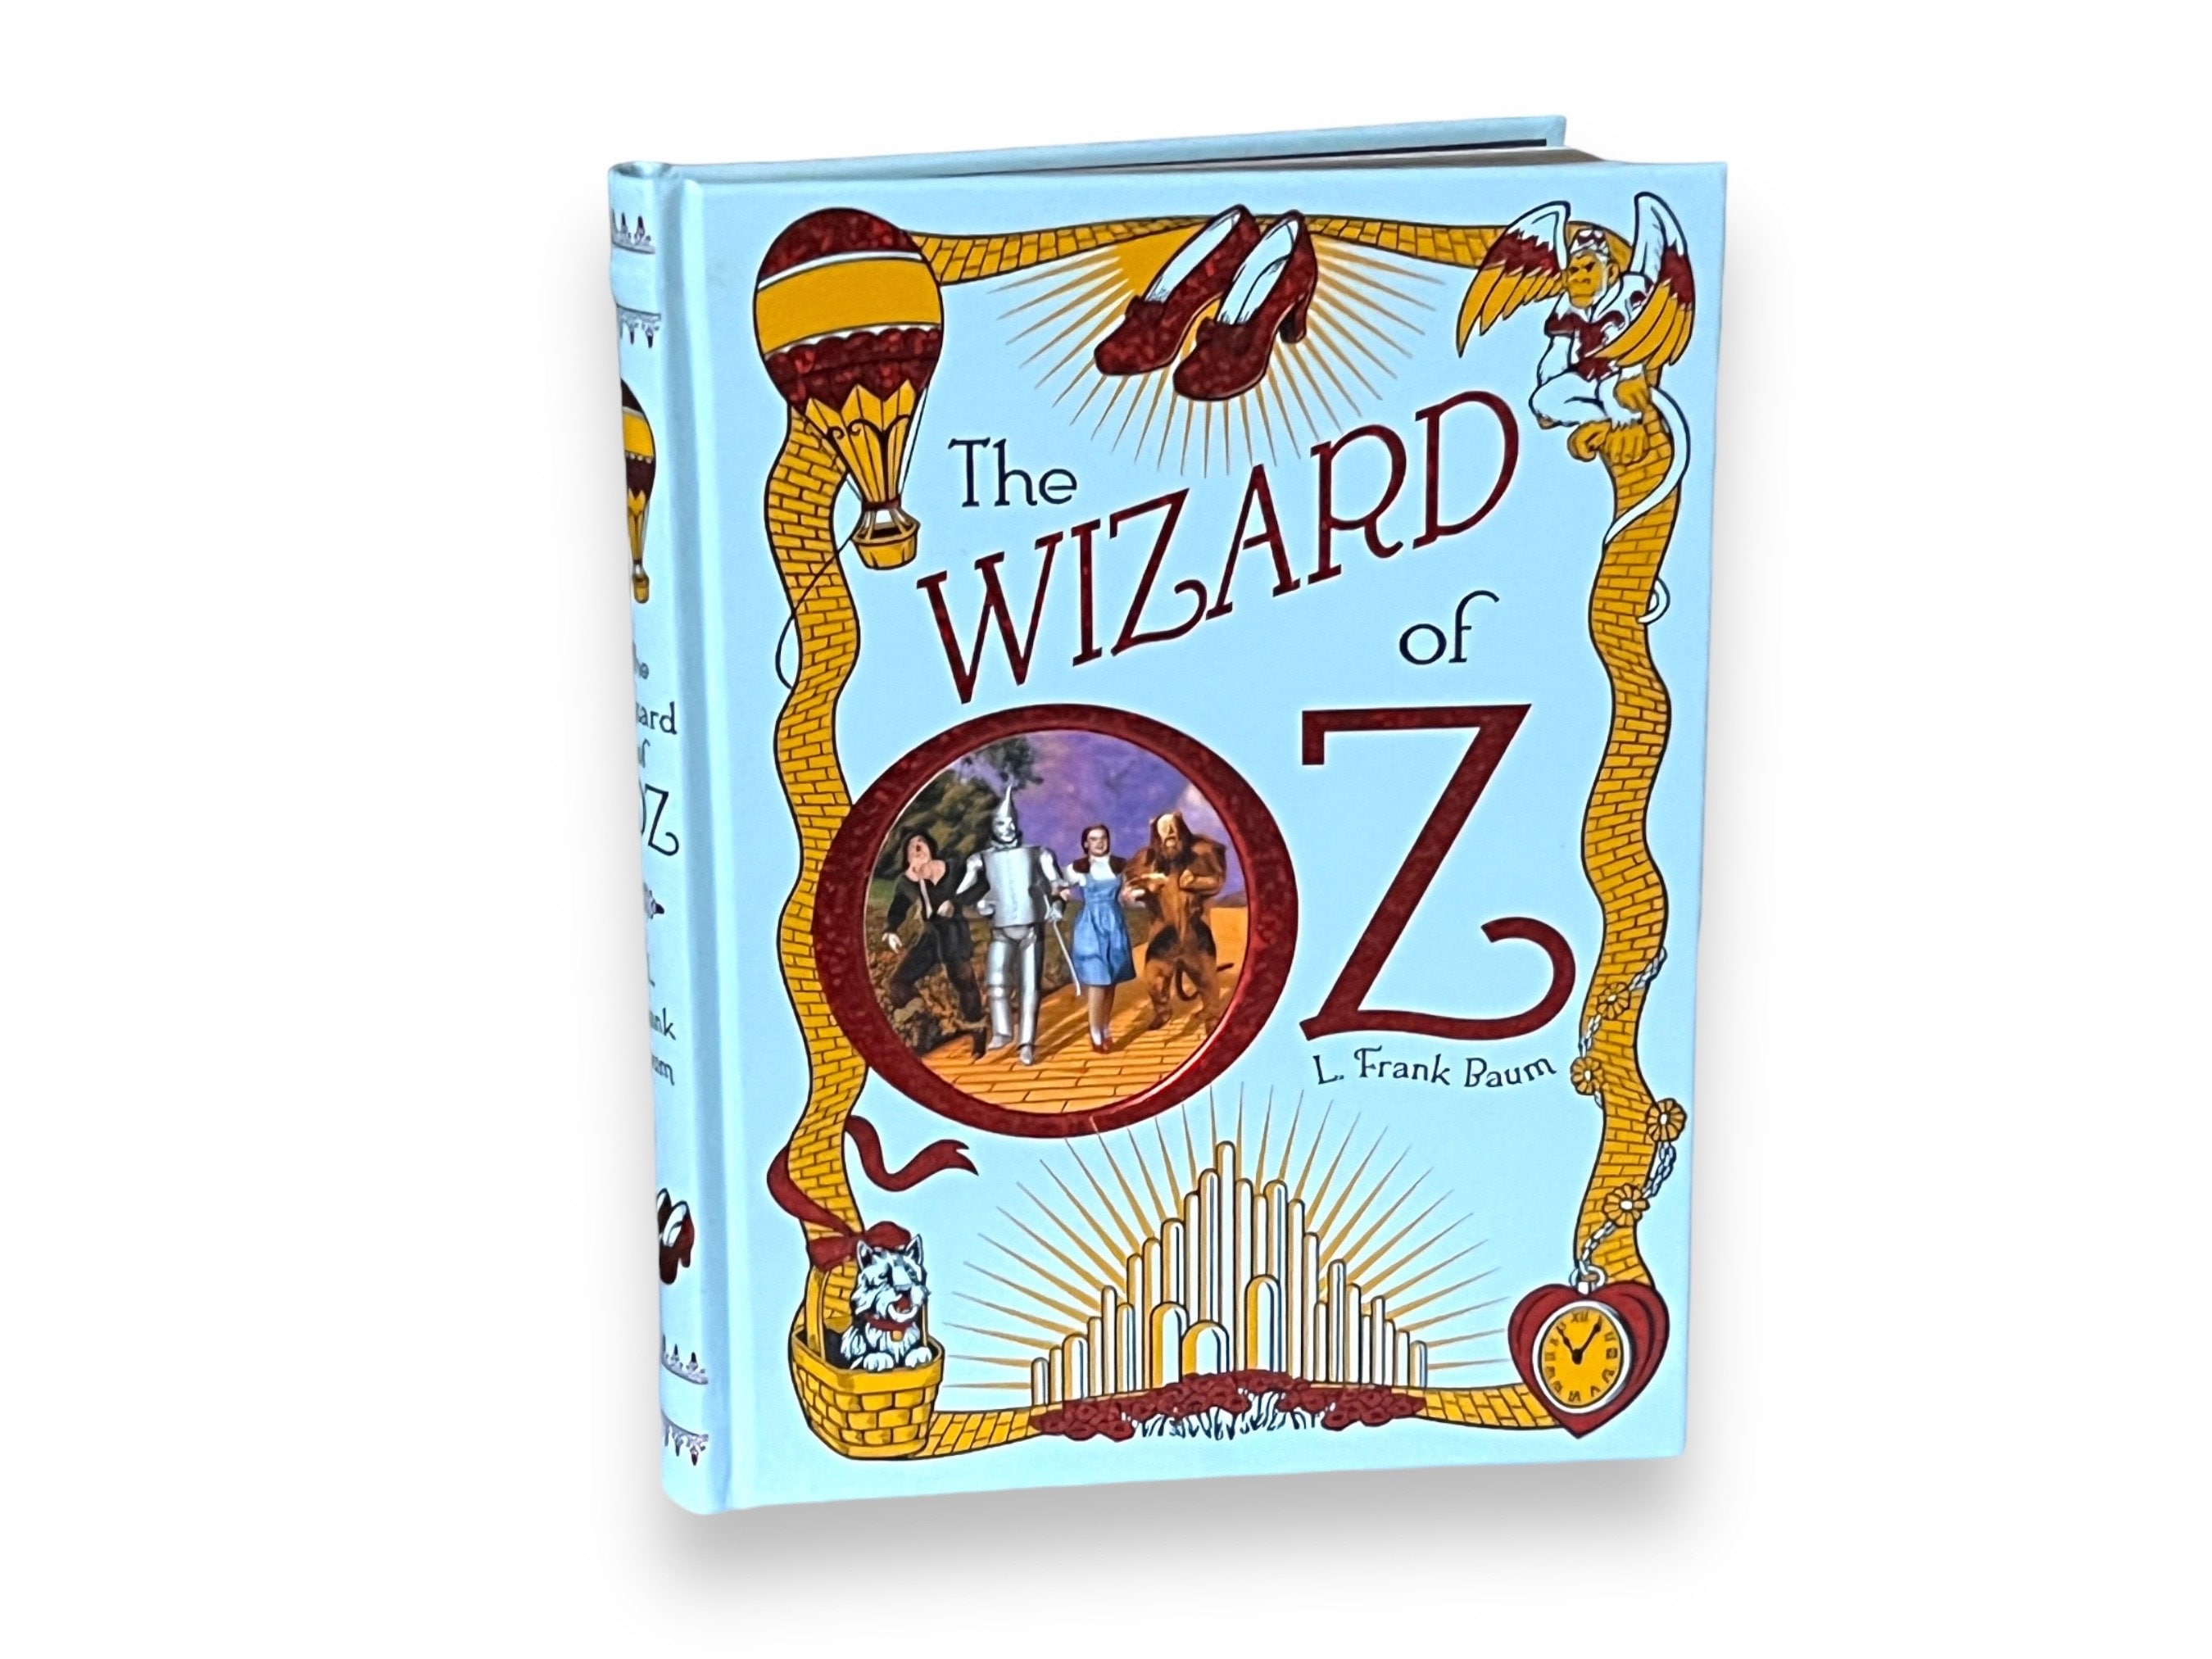 The WONDERFUL WIZARD of OZ Illustrated Hardcover Edition of L. Frank Baum's  Classic Novel and 1 Diamond Art Cover Project Inside the Box 